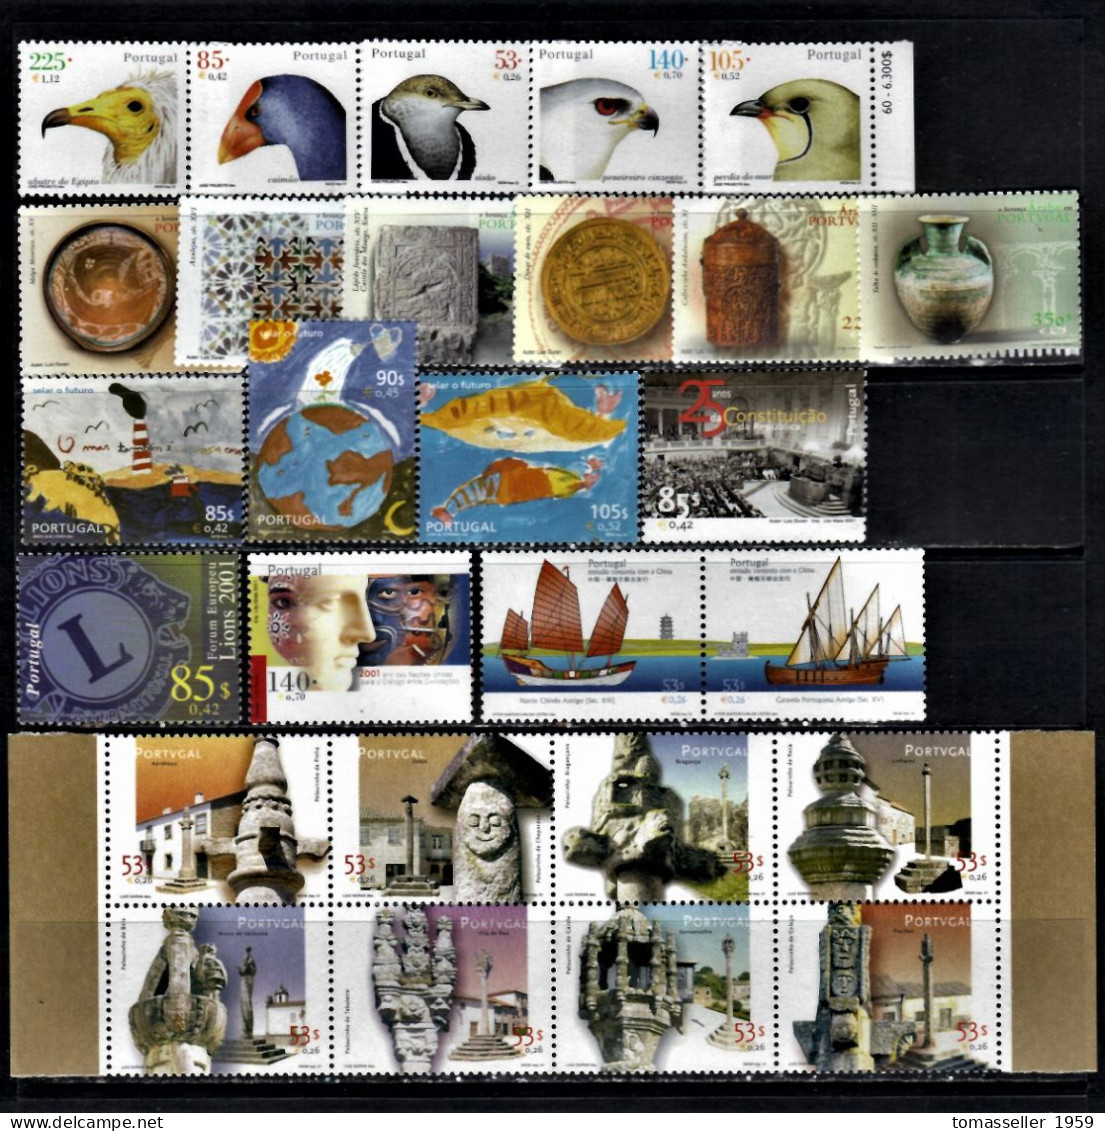 Portugal-2001- Year Set. 19 Issues-(stamps,s/s,booklets)-MNH** - Annate Complete